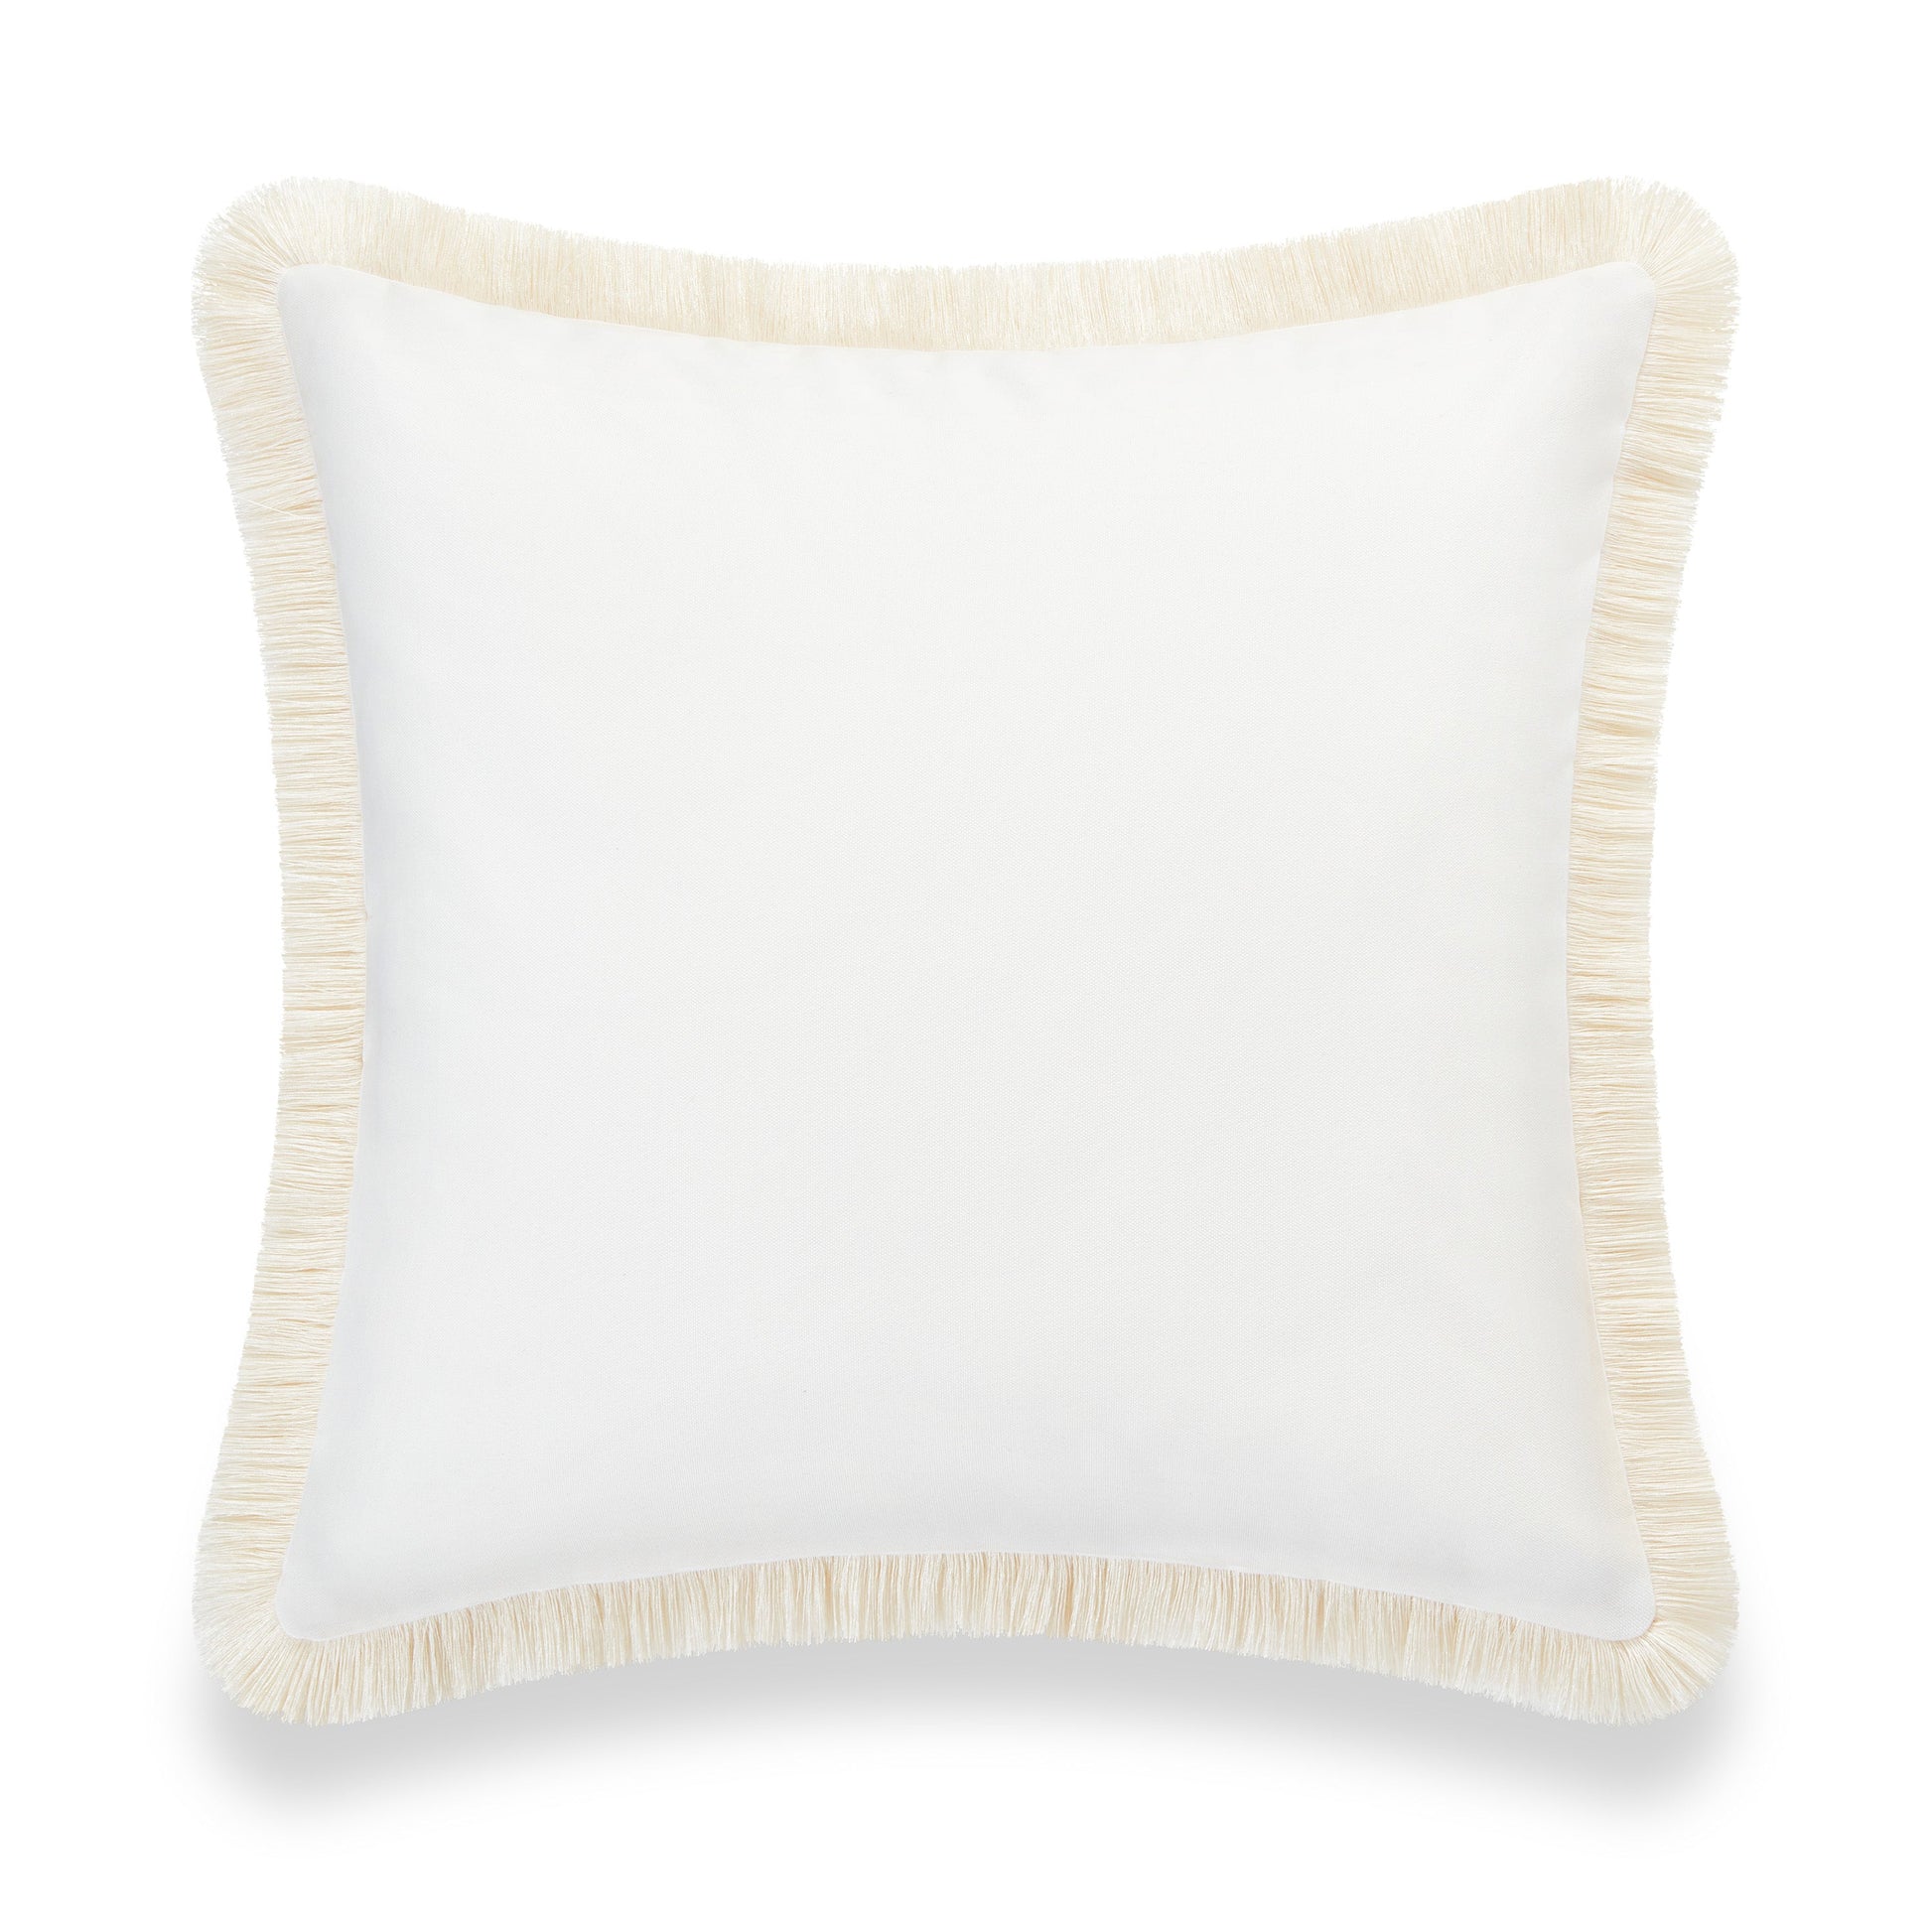 Coastal Indoor Outdoor Pillow Cover, Fringe, Solid White, 20"x20"-4